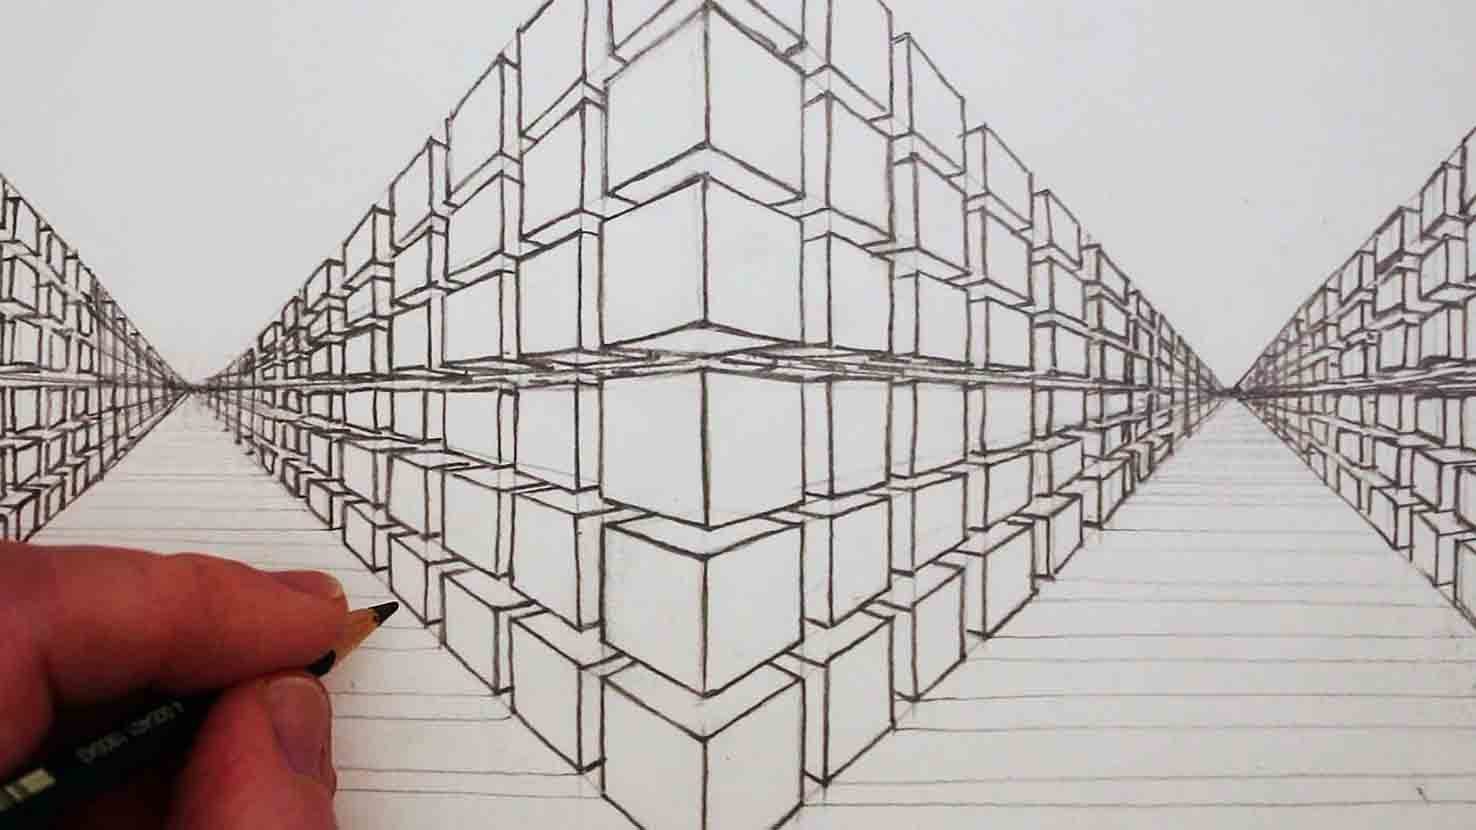 5 great Exercises to learn Perspective Drawing the easy Way